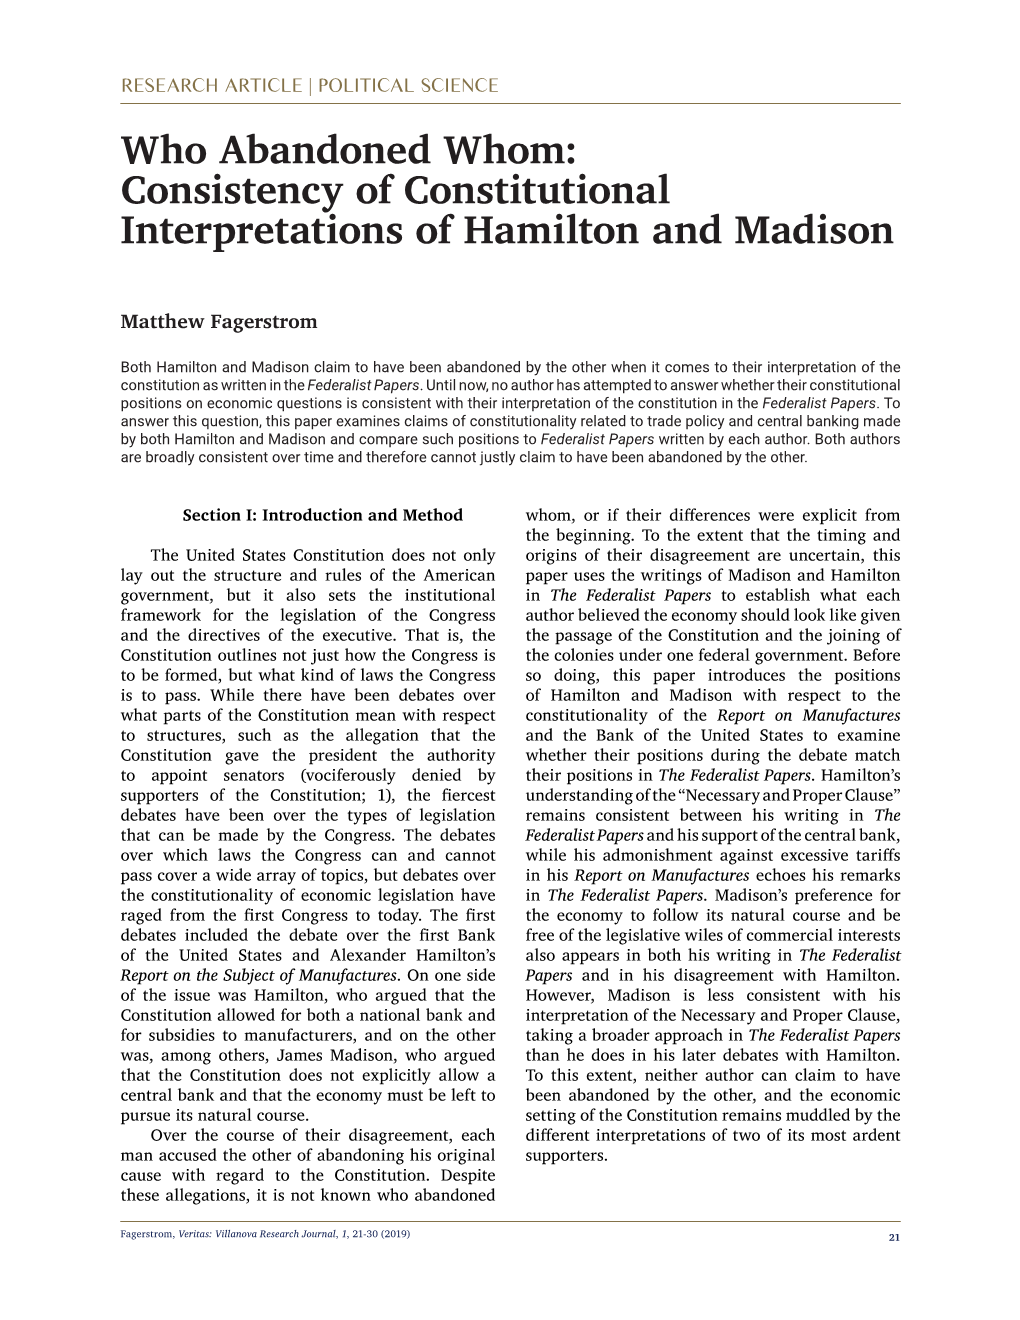 Consistency of Constitutional Interpretations of Hamilton and Madison